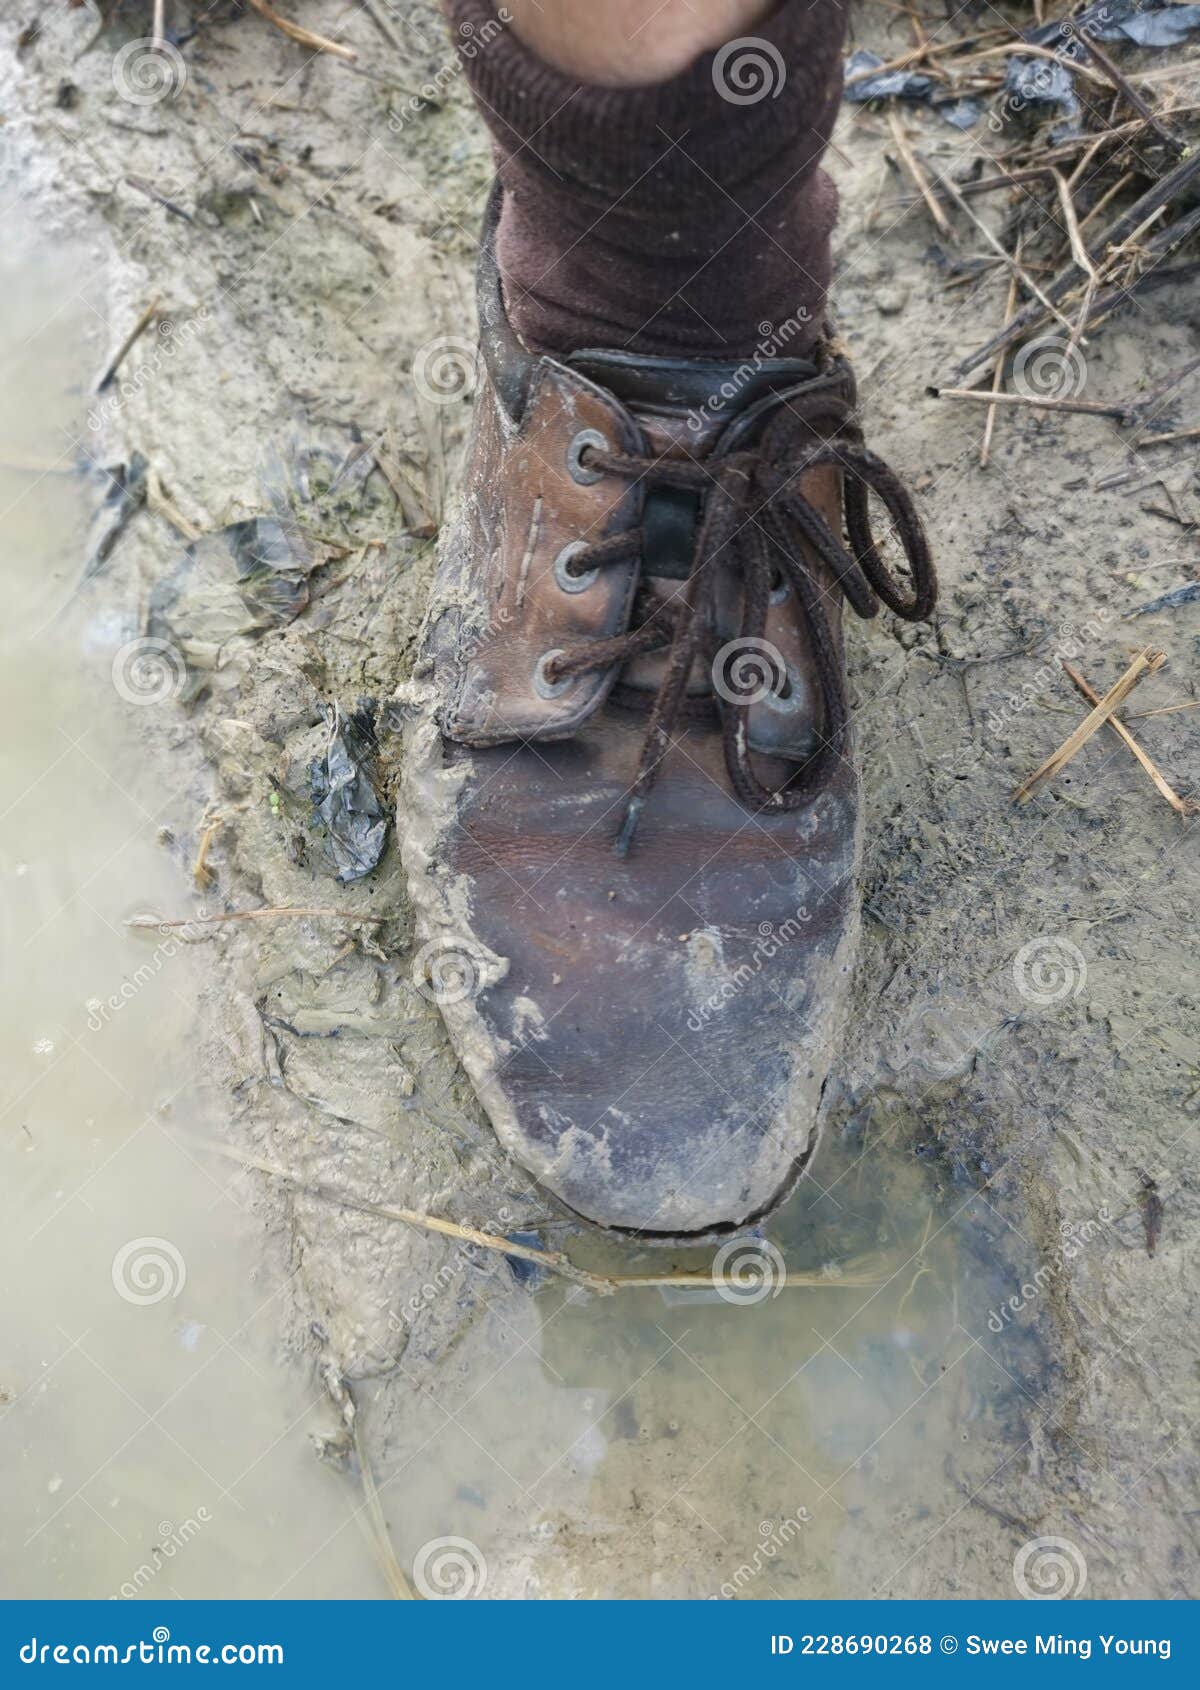 Old Shoe Stick with Mud from the Swampy Ground Stock Photo - Image of ...